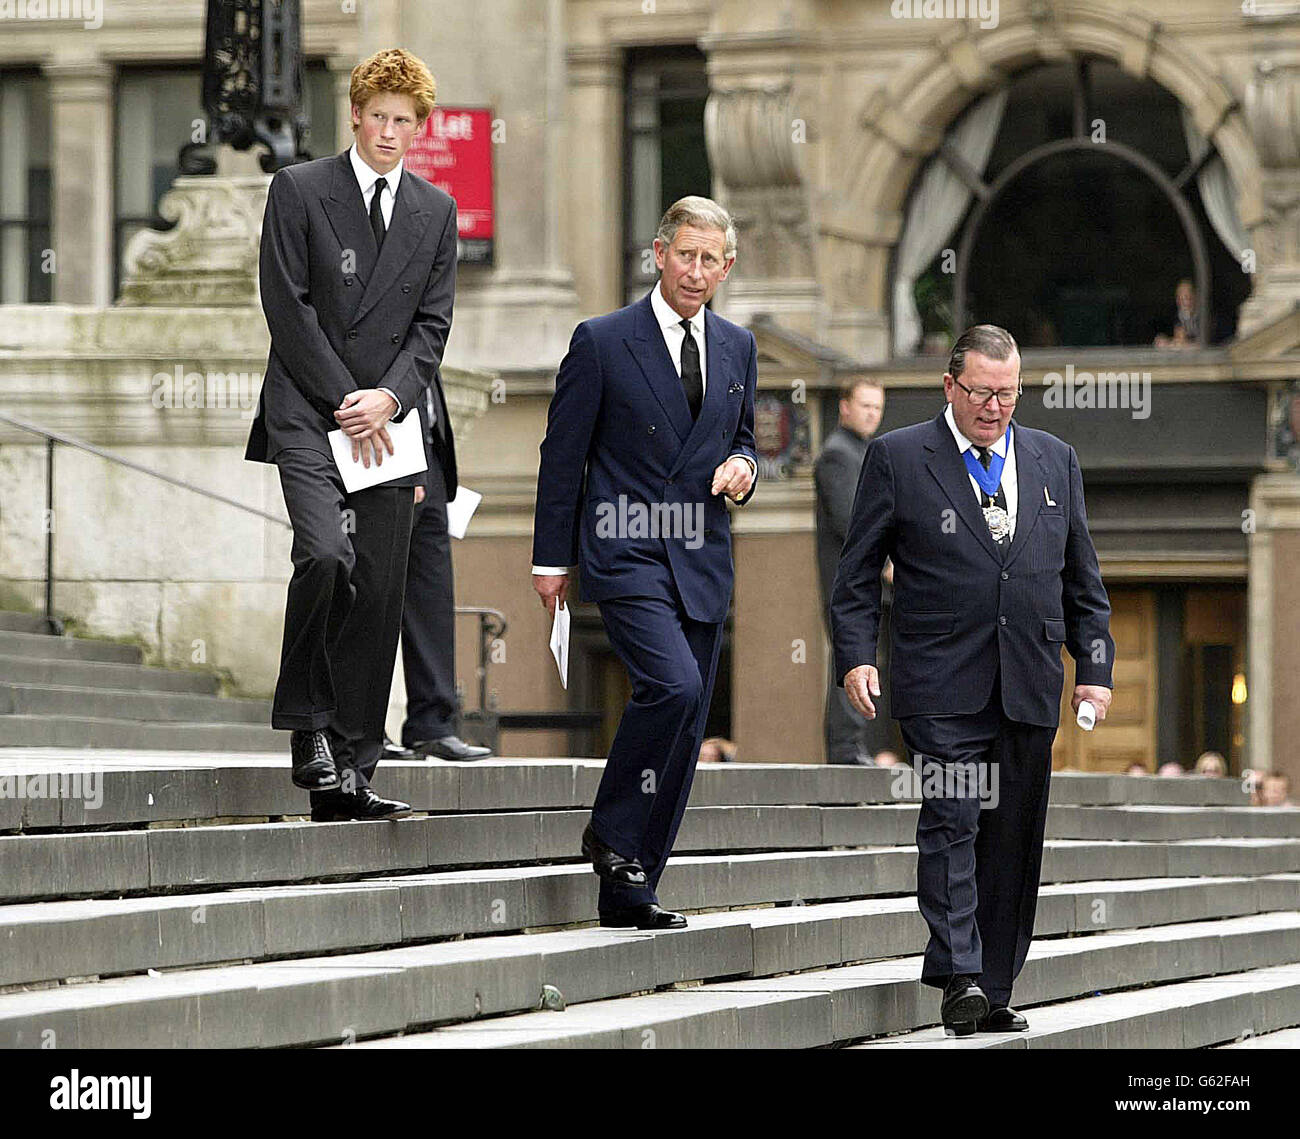 The Prince of Wales and Prince Harry after the September 11th service at St Paul's Cathedral in London. * ..where they attended the service of Remembrance and Commemoration for those who died a year ago in terrorist attacks on New York, Washington and Pennsylvania. During the service, 3,000 white rose petals representing those who died that day are being released from the cathedral's Whispering Gallery. Afterwards, the Prince Charles and Prince Harry are to meet relatives of the 67 British victims. Stock Photo